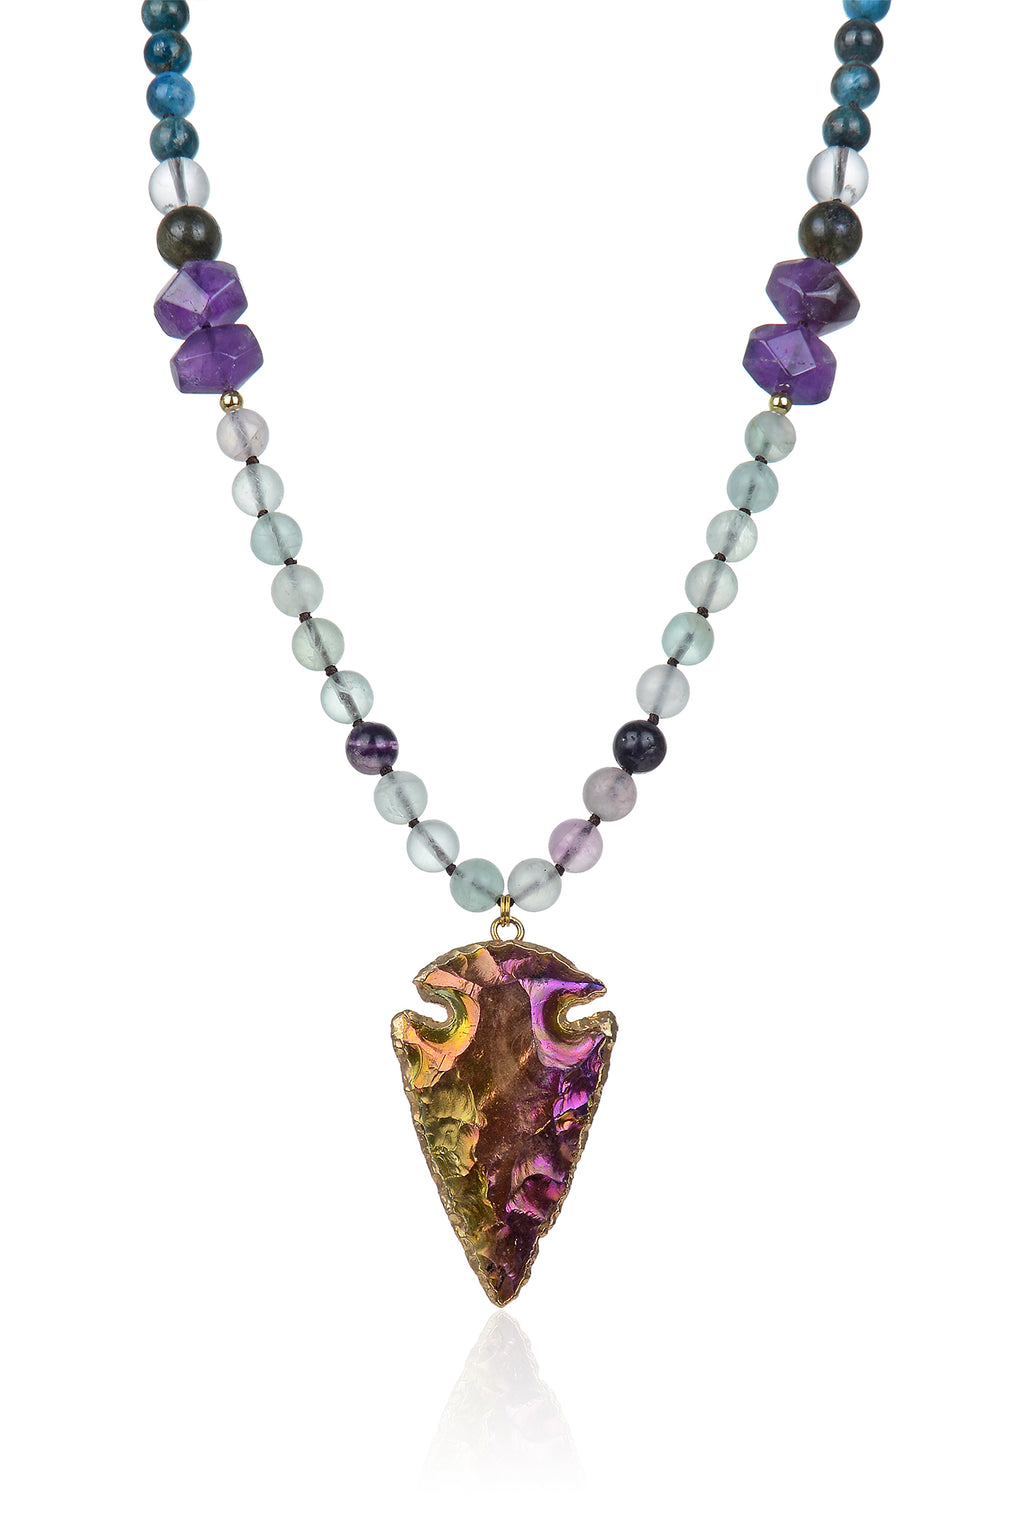 Rainbow fluorite stone knotted necklace with an arrowhead pendant.